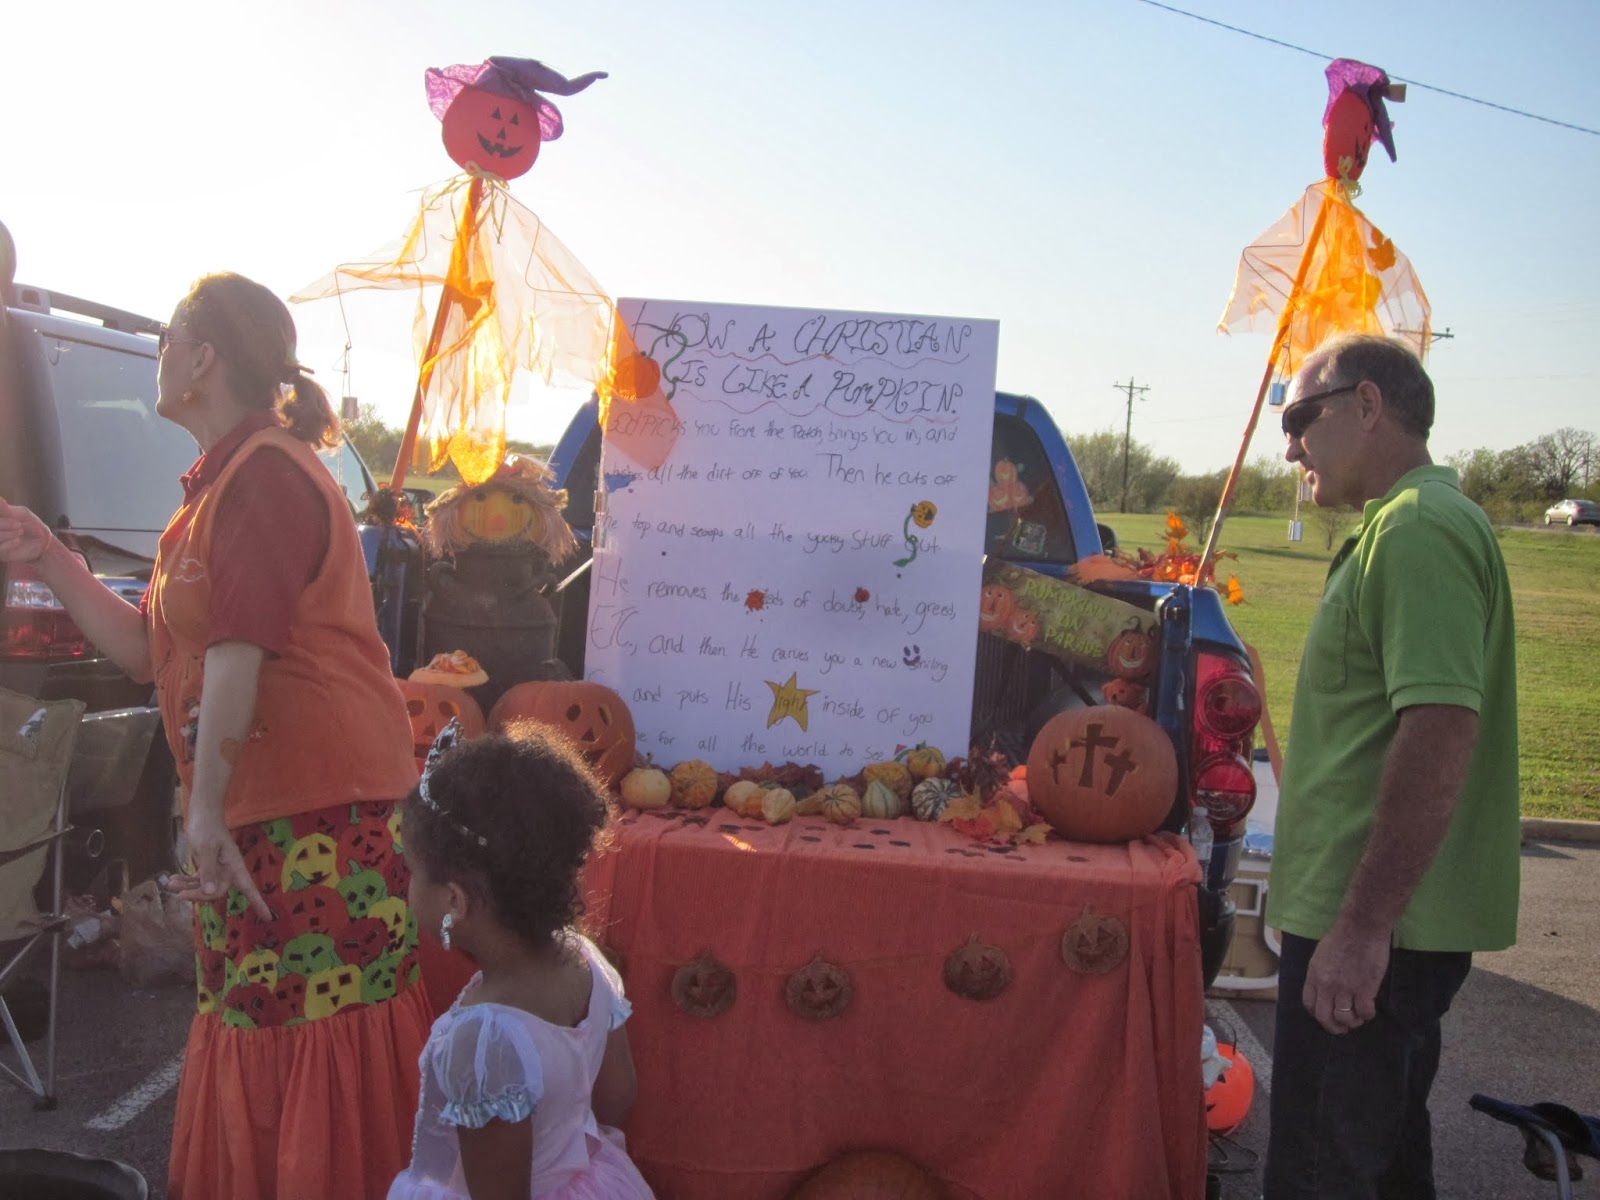 IDEAS UNLIMITED: TRUNK OR TREAT DECORATING IDEAS